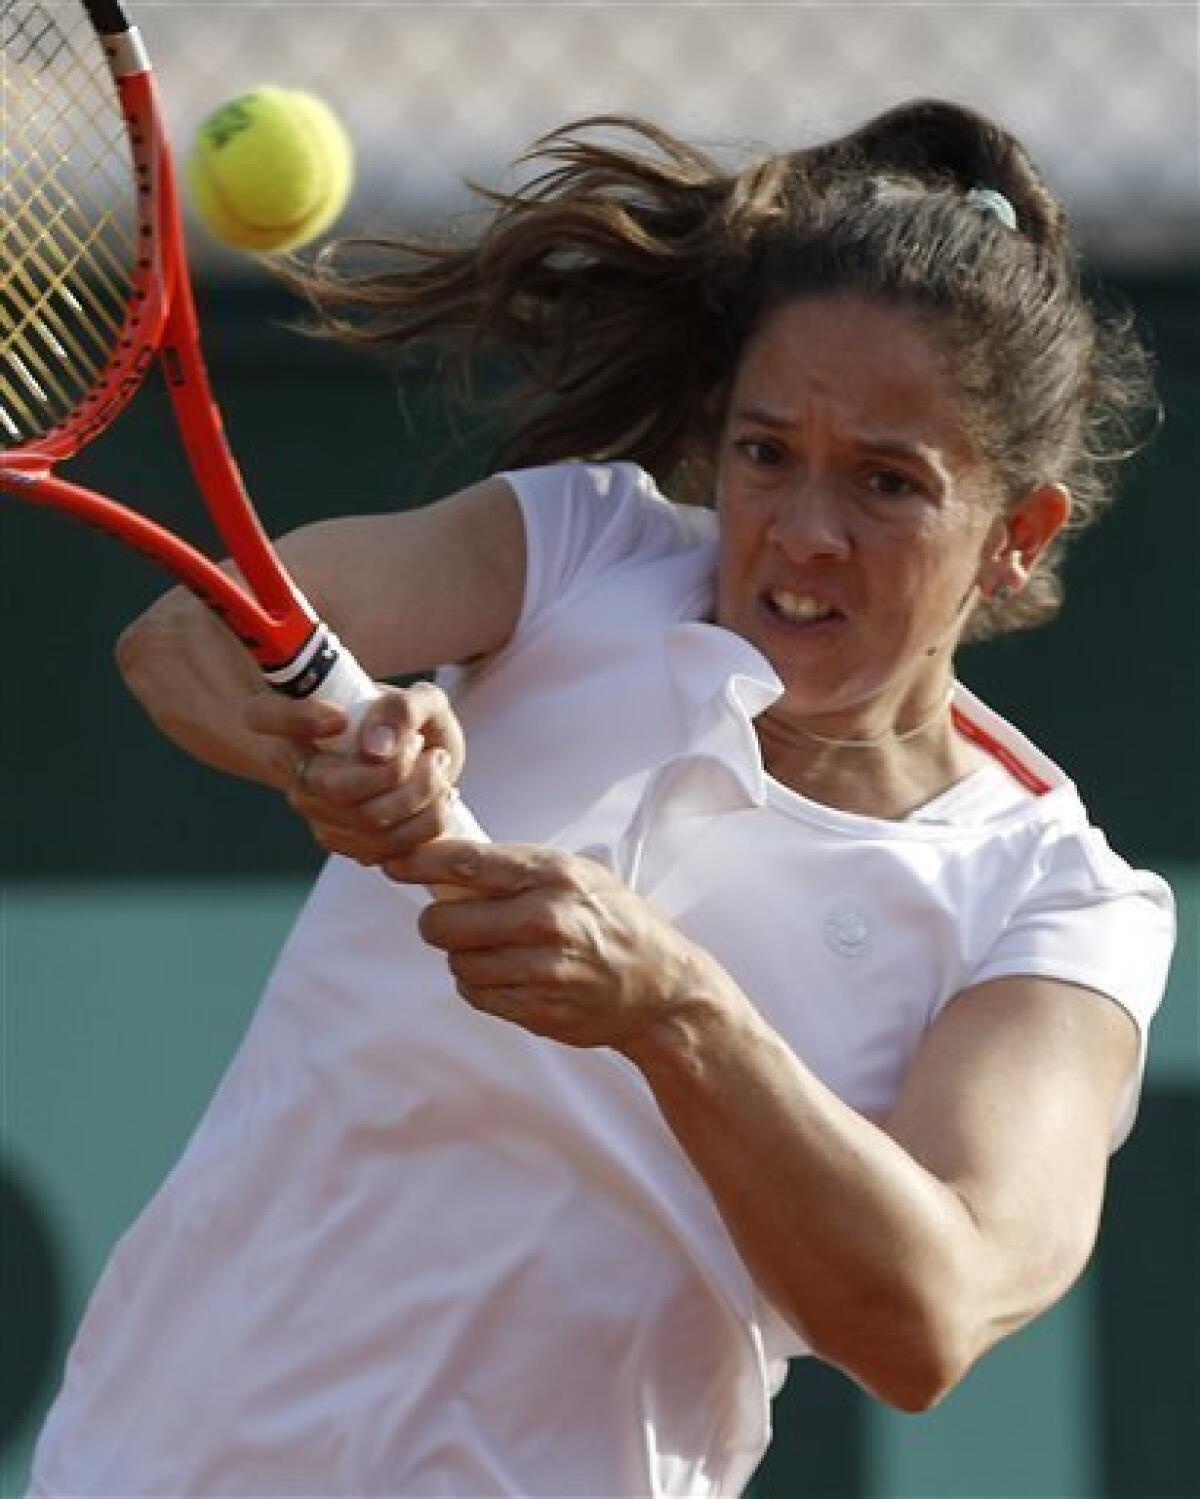 Switzerland's Patty Schnyder returns the ball to Romania's Sorana Cirstea during his first round match of the French Open tennis tournament, at the Roland Garros stadium in Paris, Tuesday, May 24, 2011. (AP Photo/Christophe Ena)